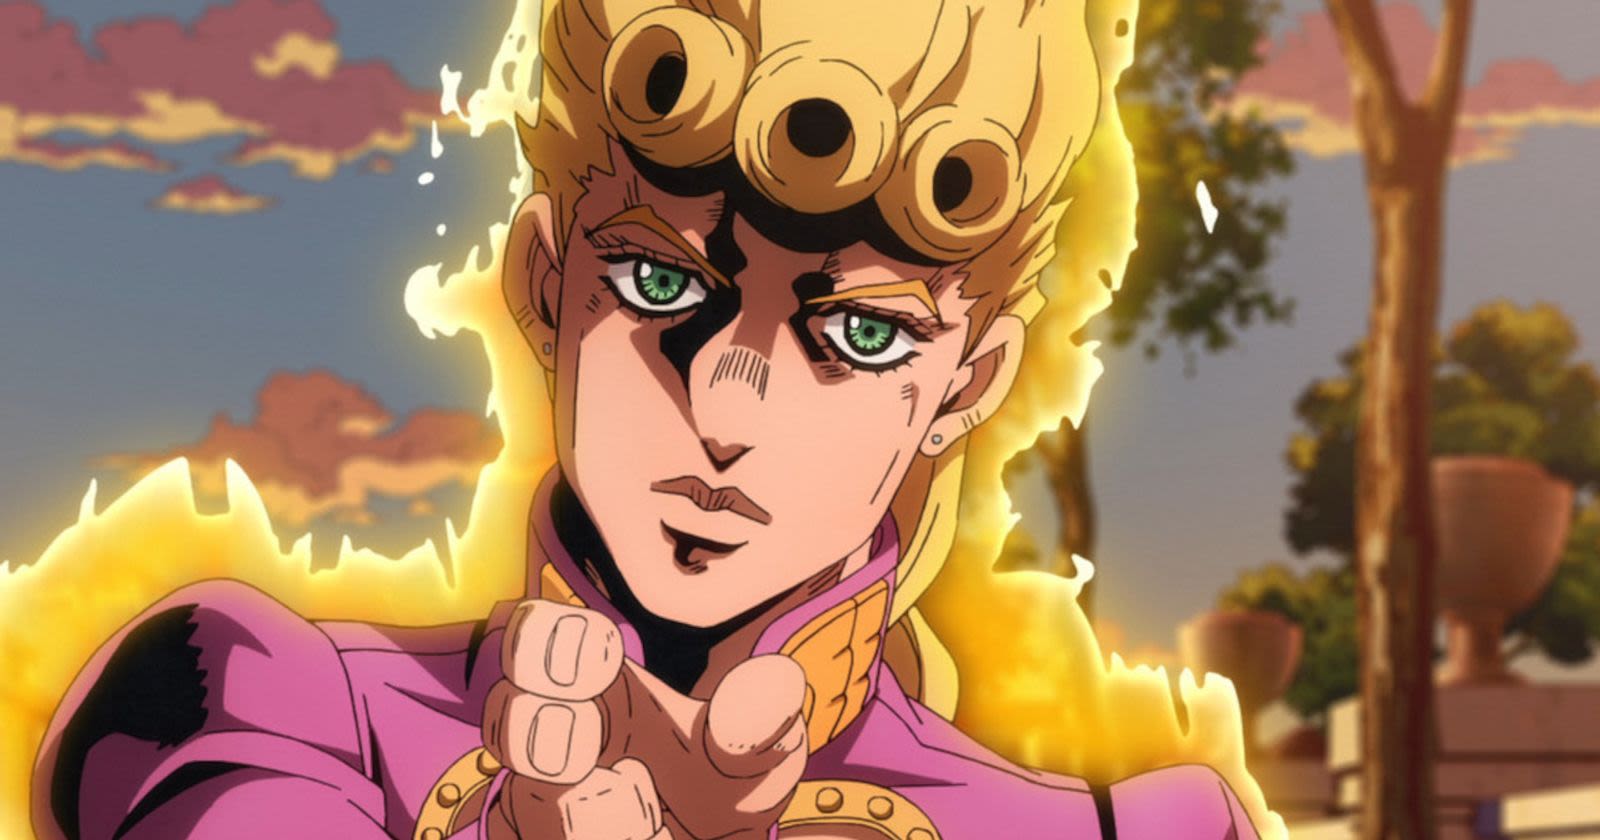 JoJo Animation Director May Have Just Hinted at the Steel Ball Run Anime